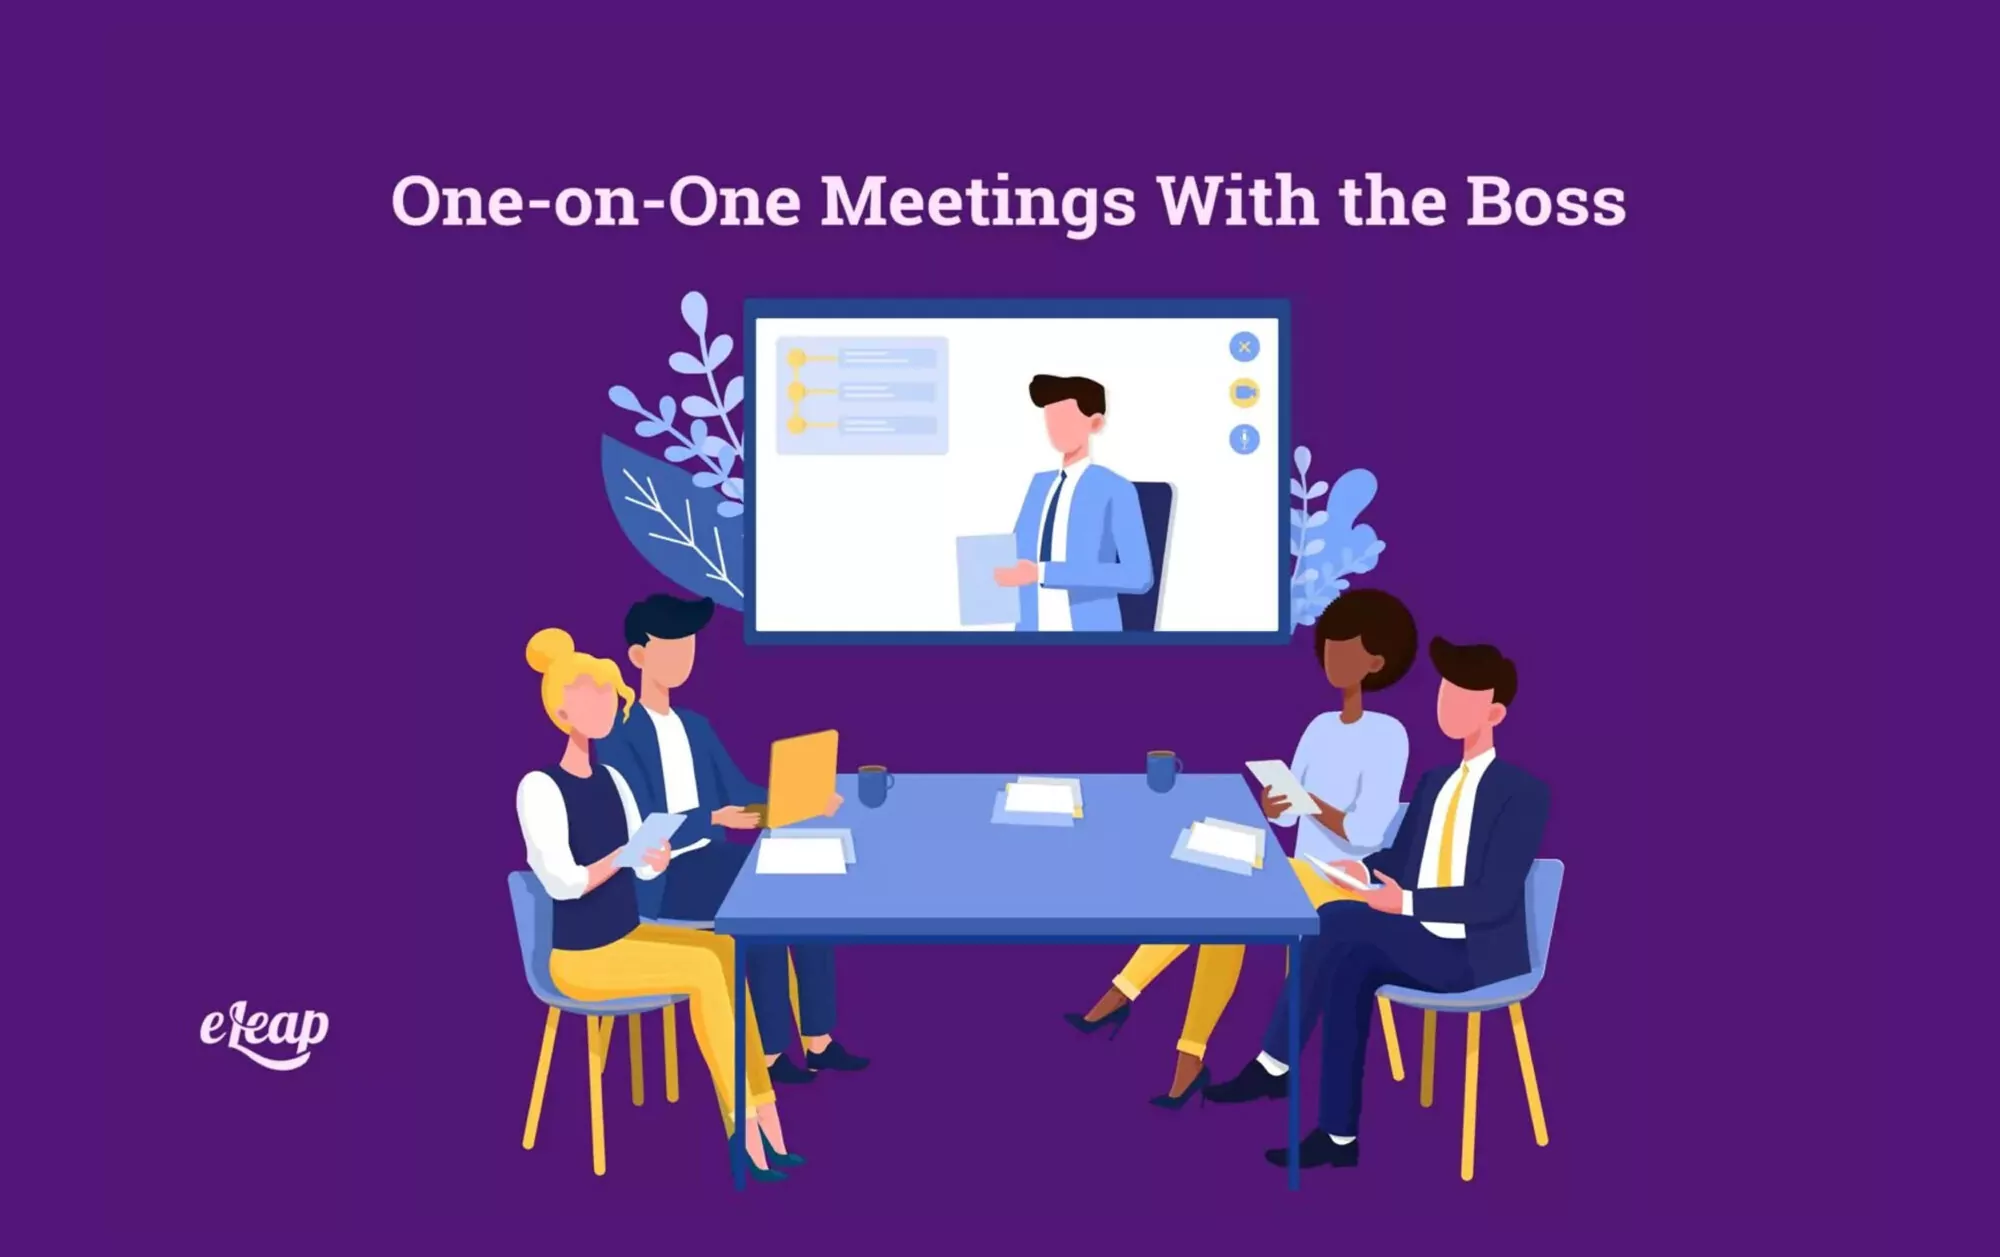 One-on-One Meetings With the Boss